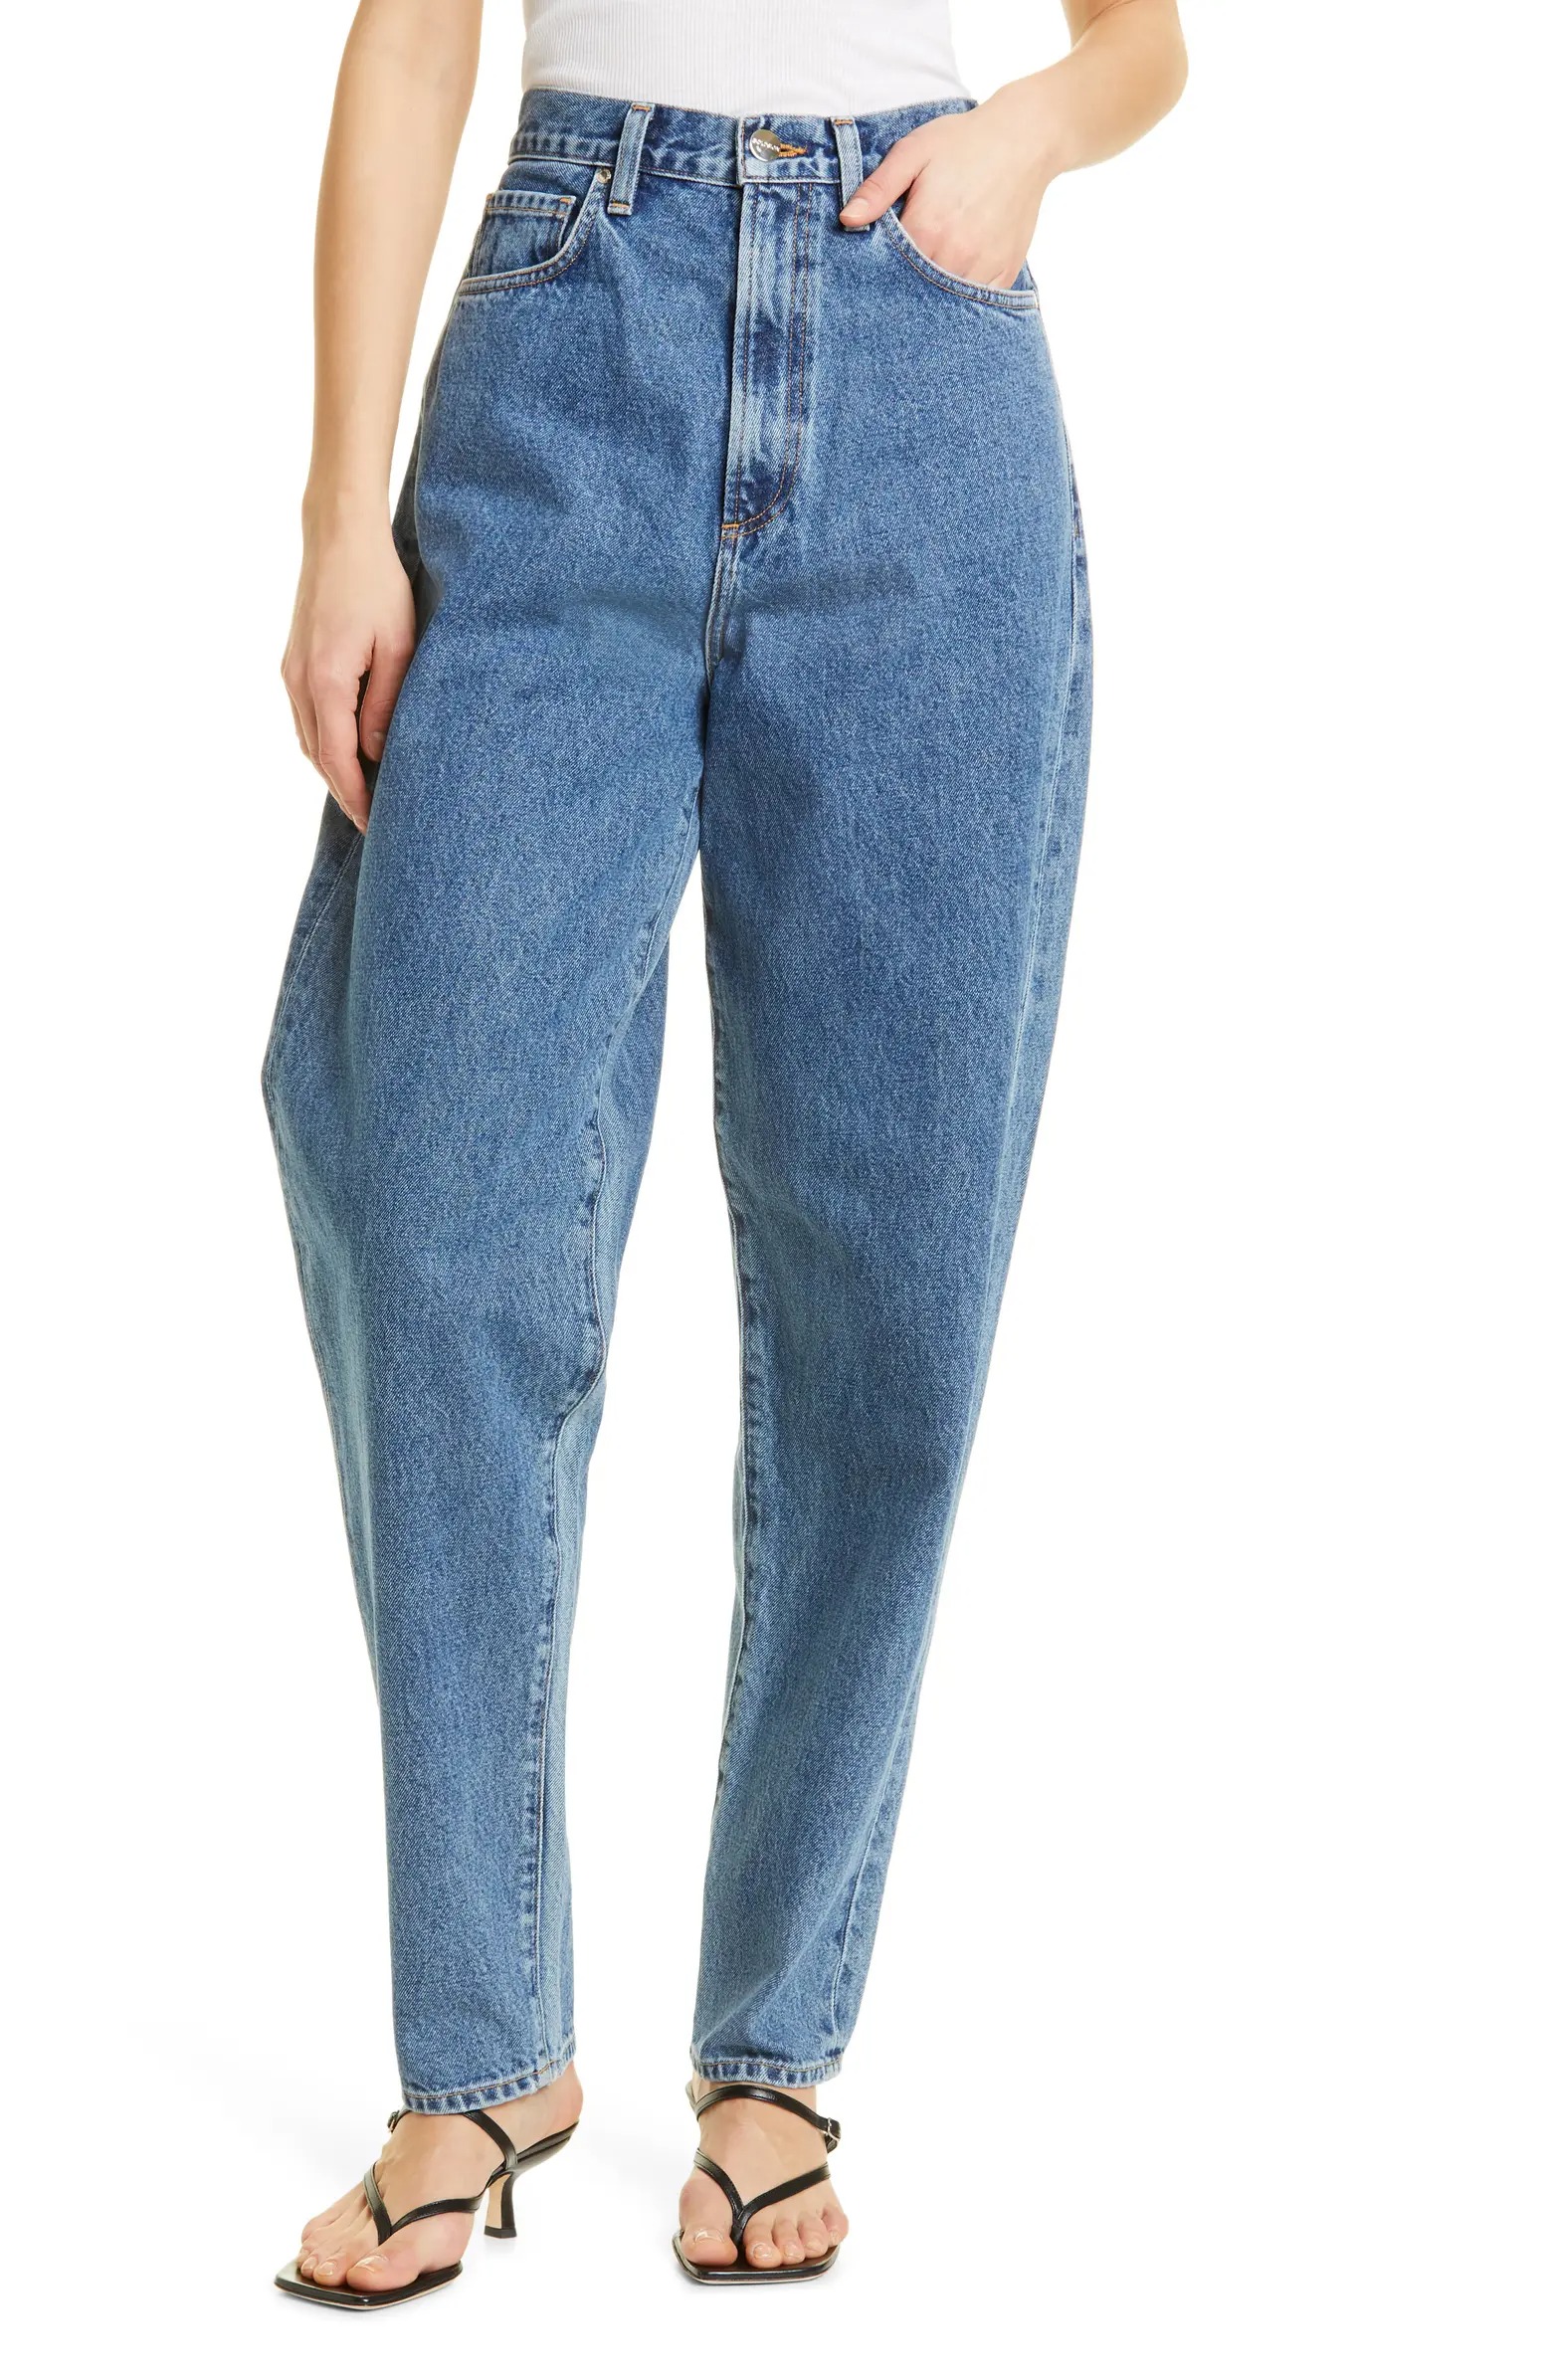 9 Denim Trends to Buy at Nordstrom (and 9 to Retire) | Who What Wear